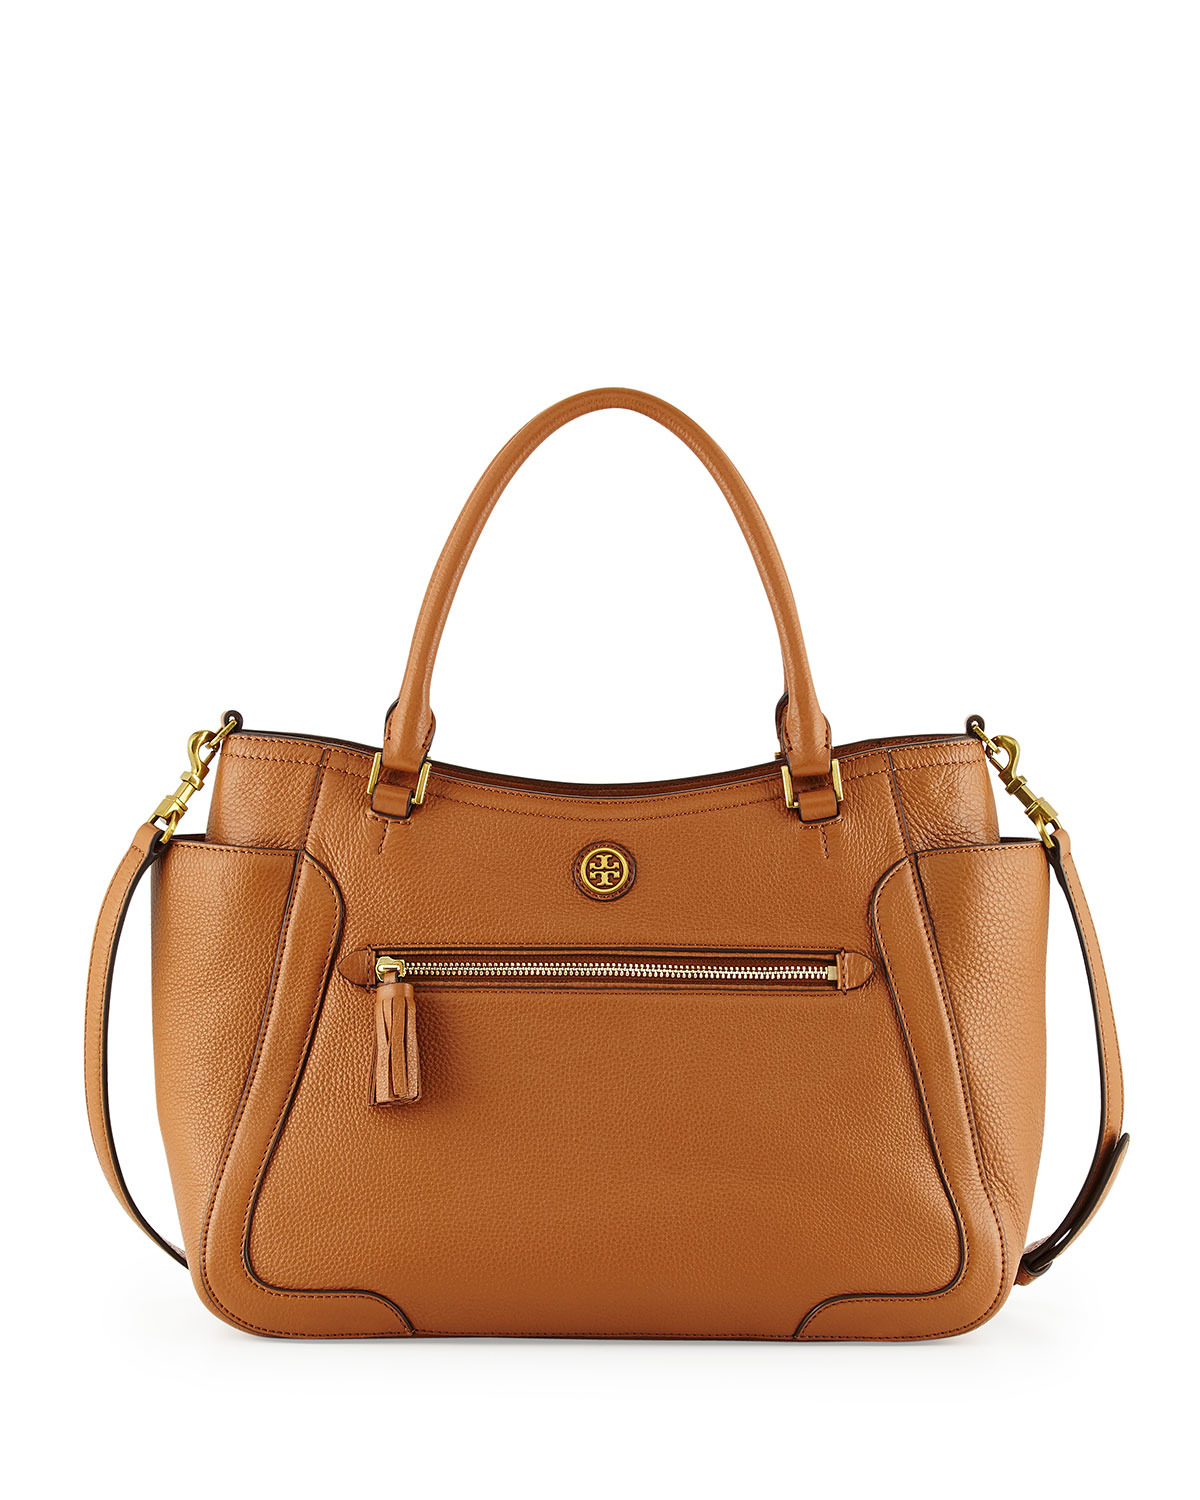 Tory burch Frances Leather Satchel Bag in Brown (BARK) | Lyst